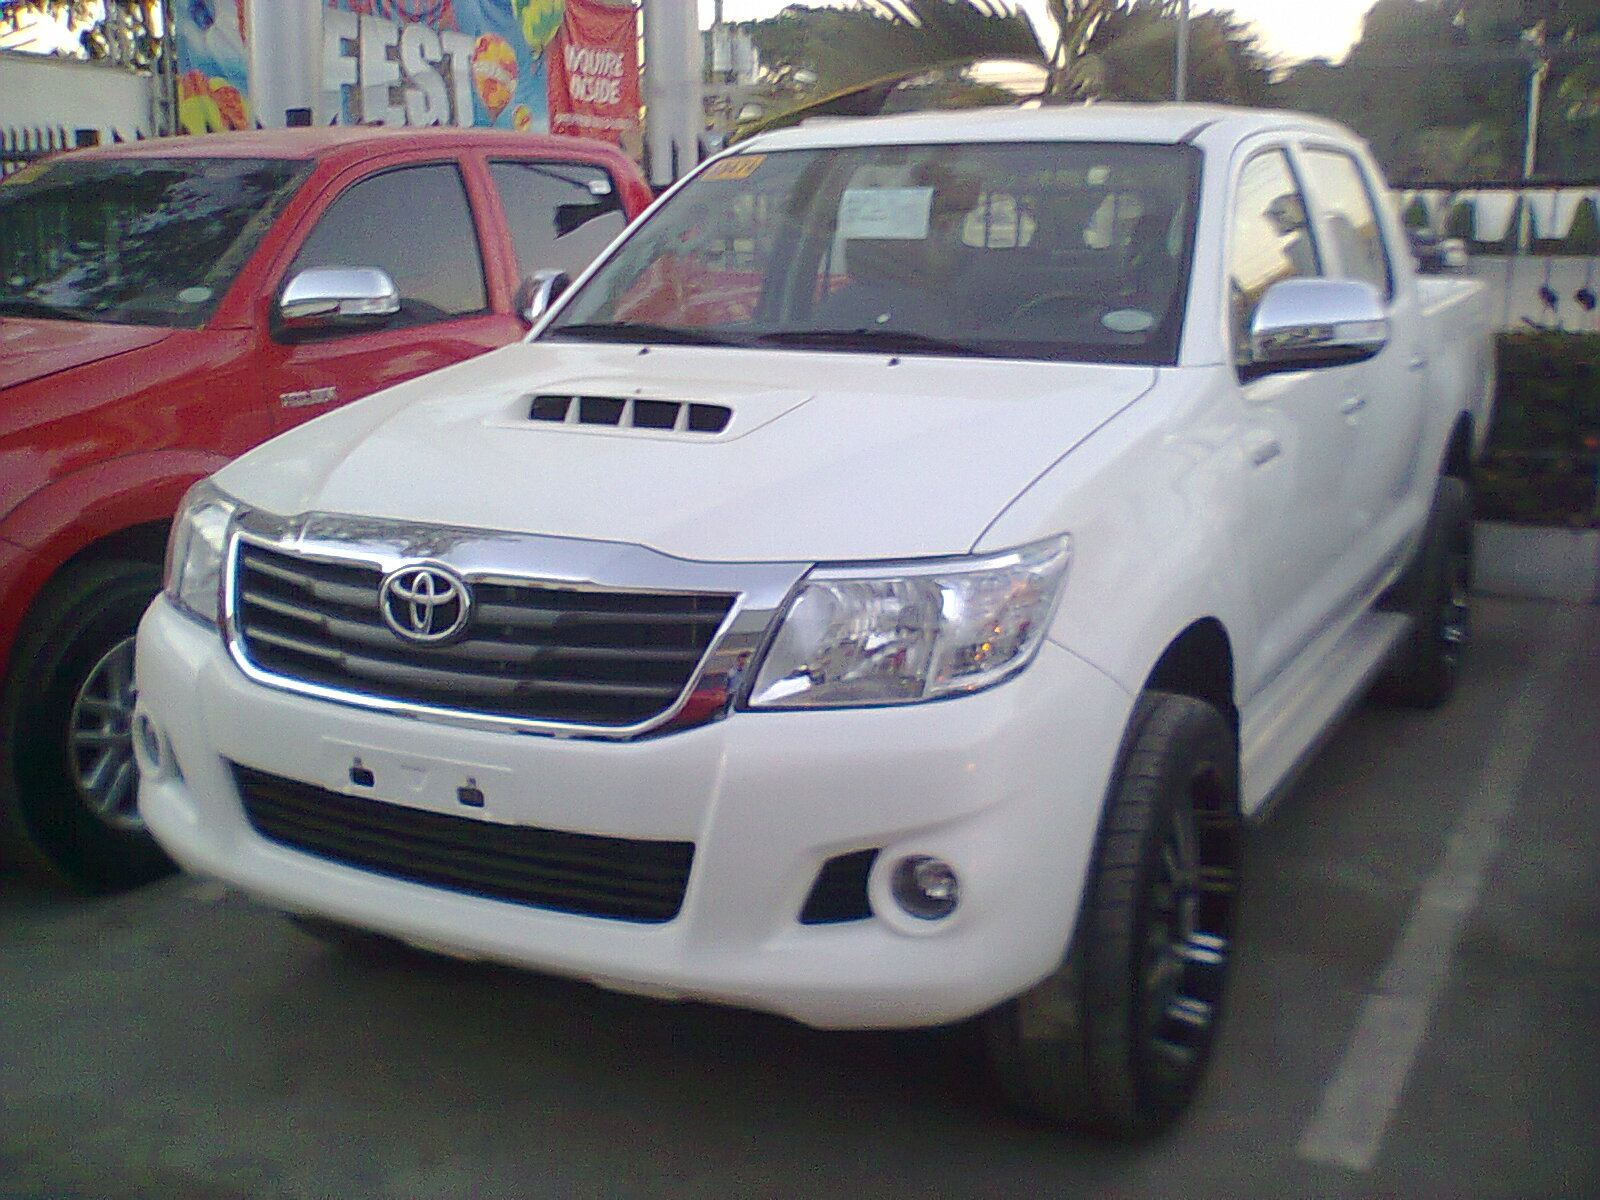 Toyota Hilux 4x2 G VNT with 20' Mags | Flickr - Photo Sharing!